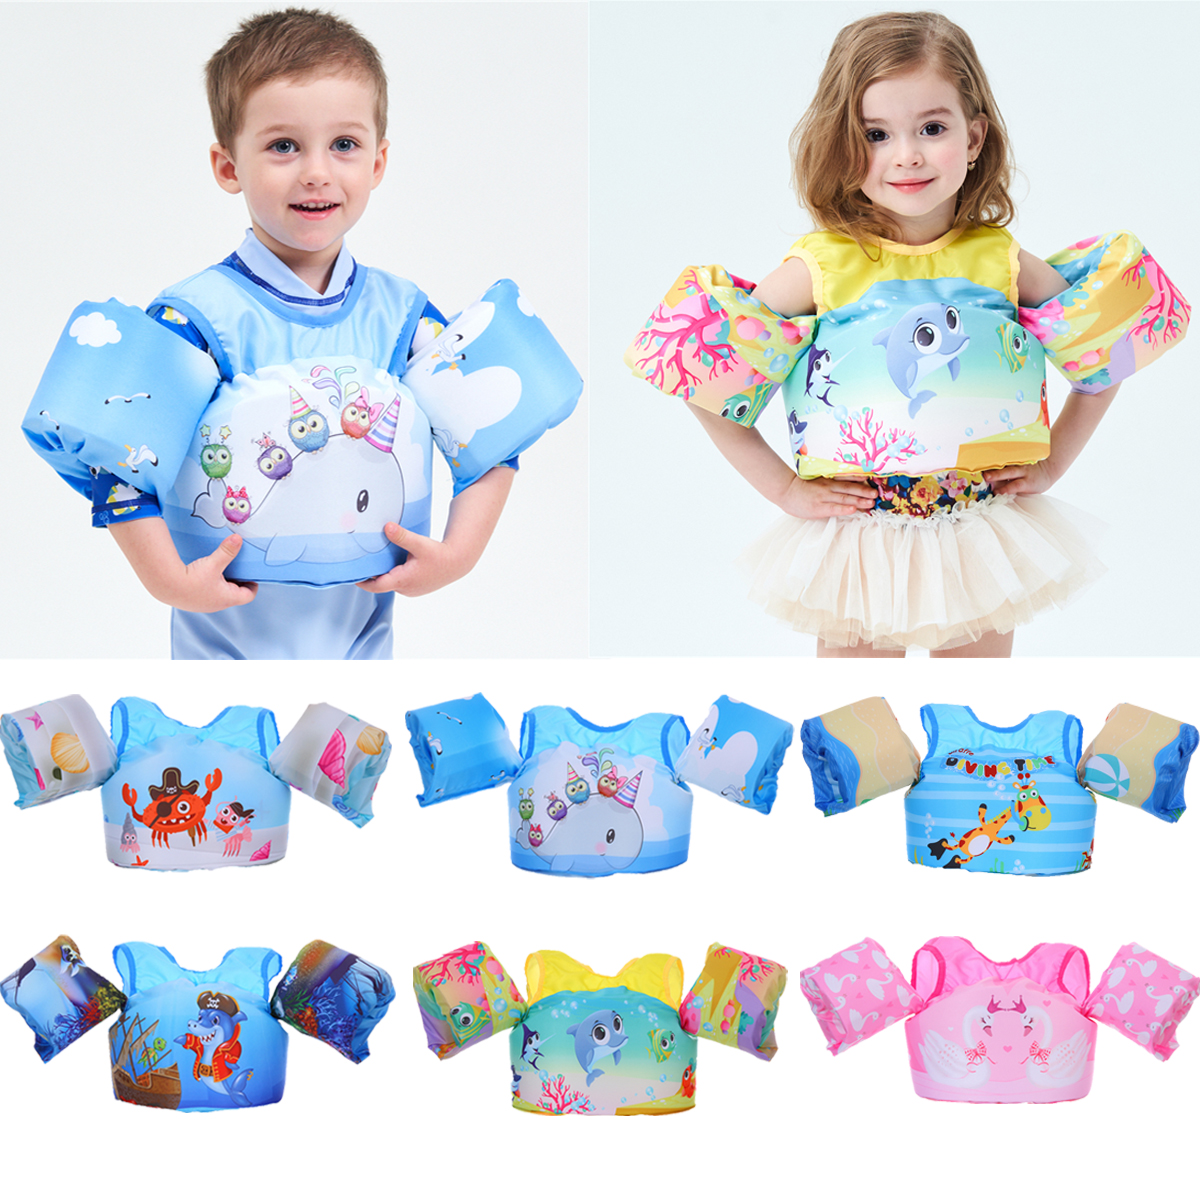 Details about   Kids Floating Swimming Vest Life Jacket Puddle Jumper Cartoon Styles buoyancy su 